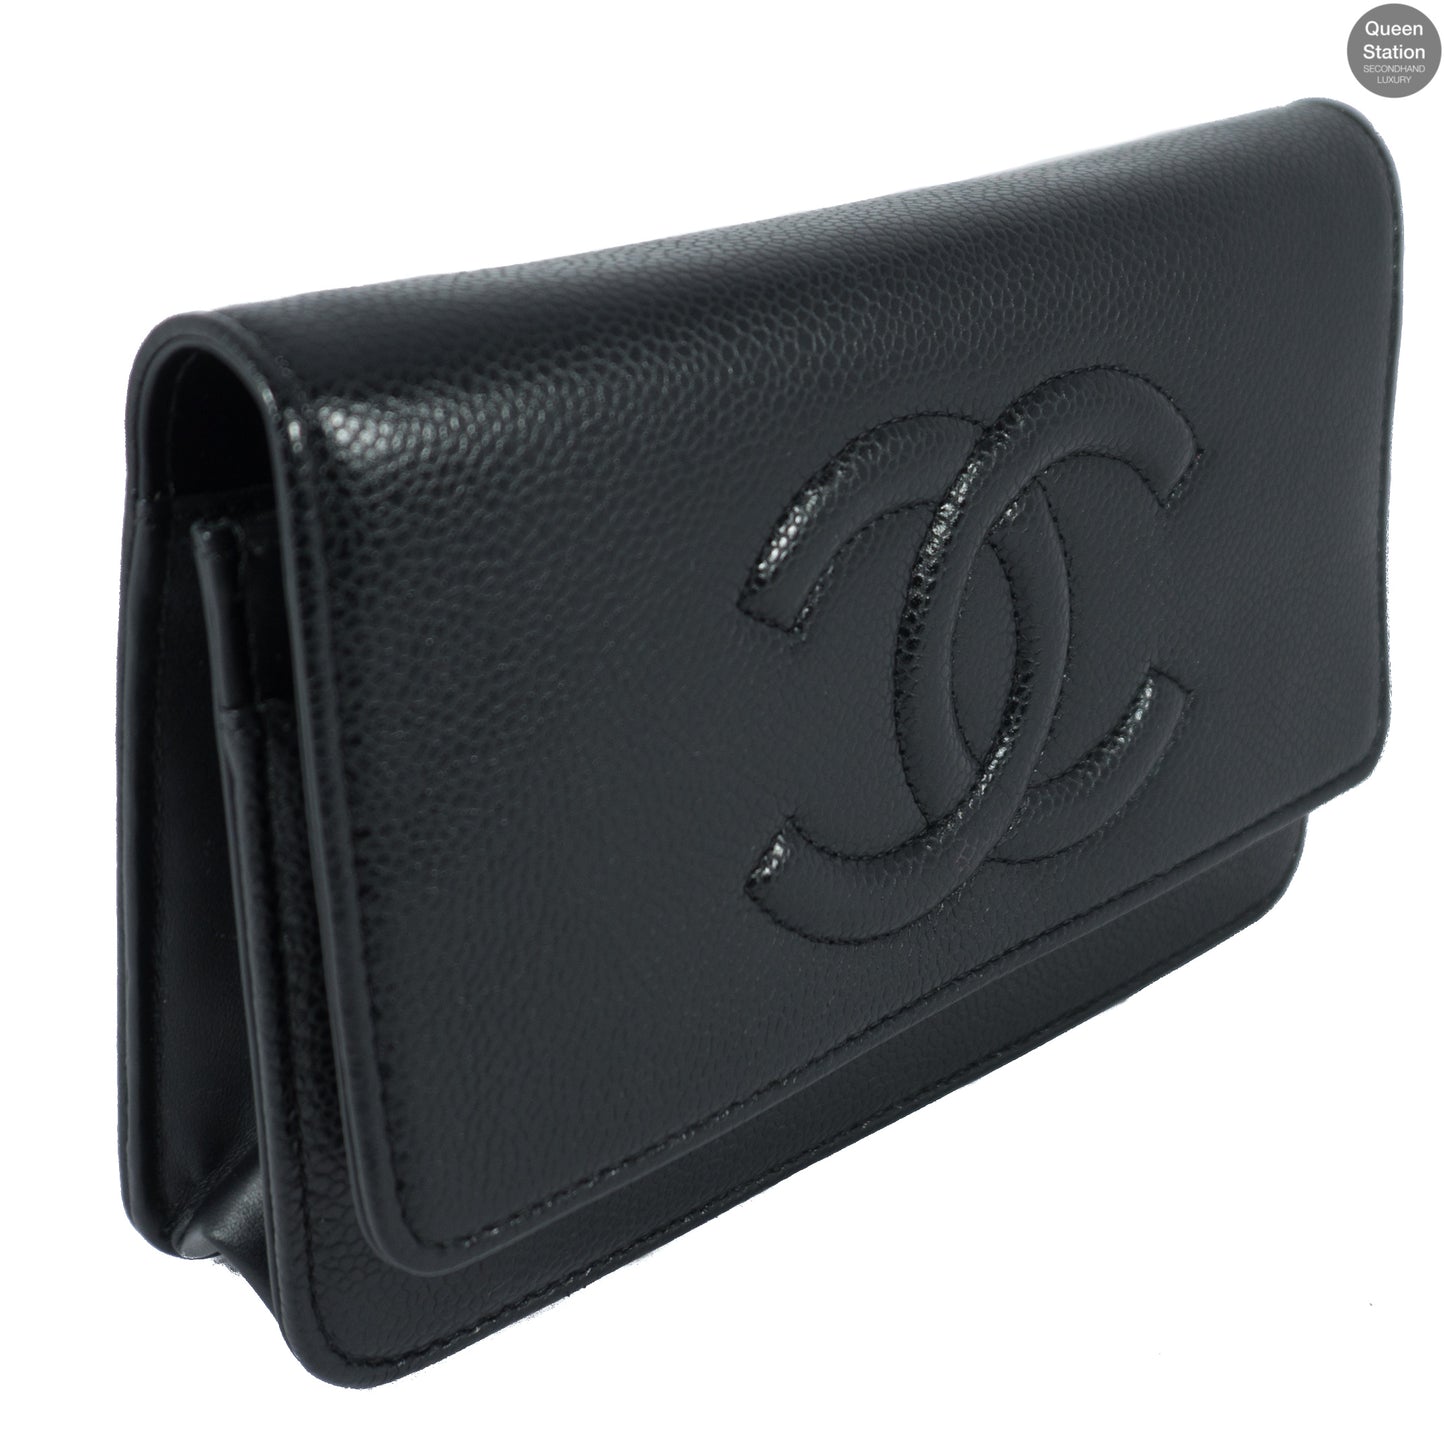 Black Caviarskin Leather Wallet on Chain WOC